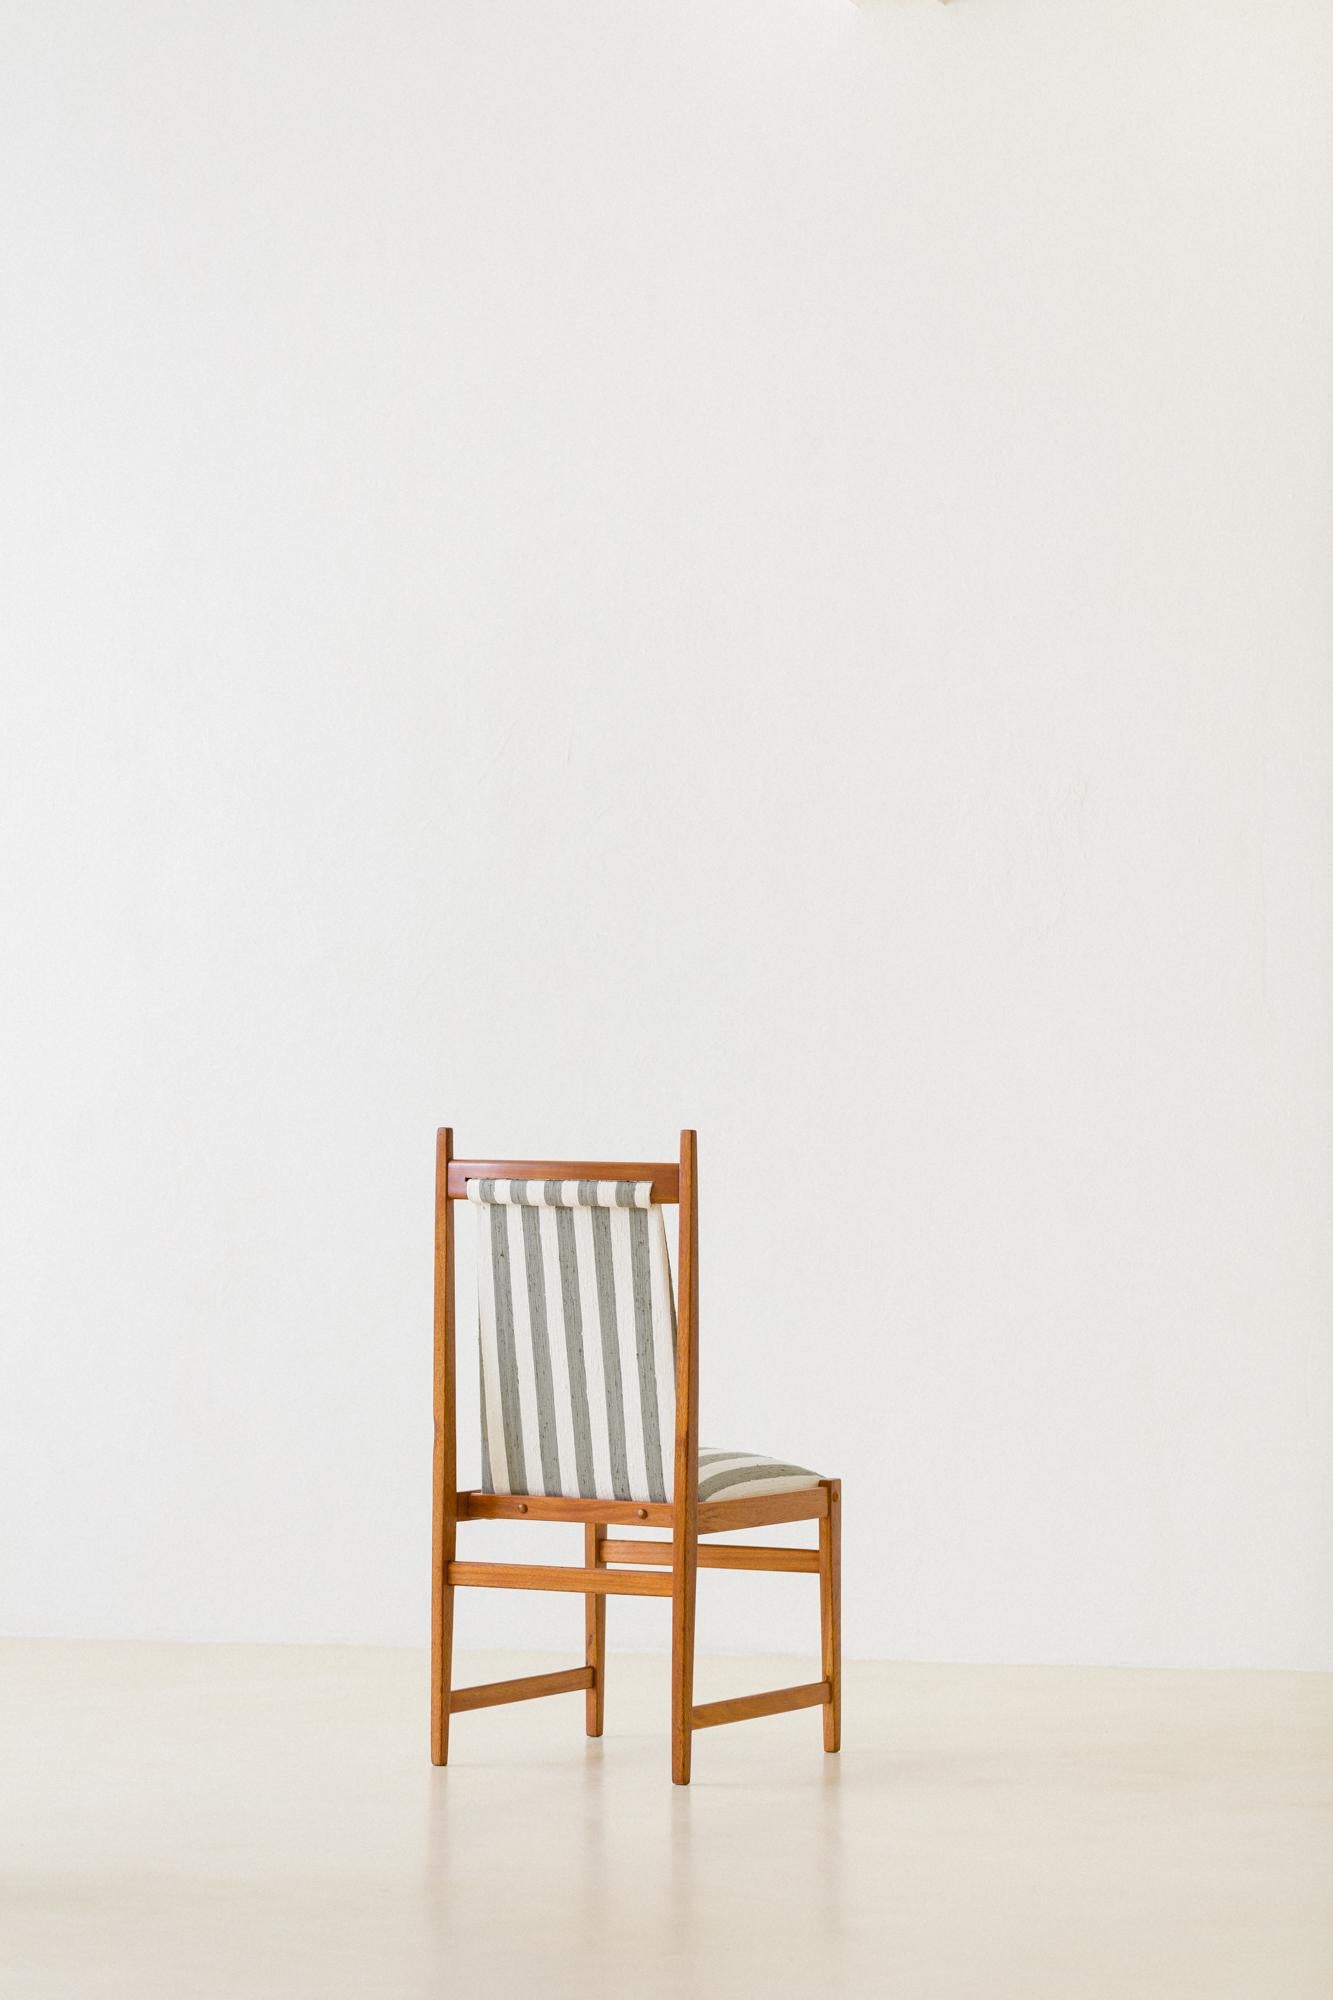 Silk Set of Six Dining Chairs, by Celina Decorações, 1960s, Brazilian Midcentury For Sale